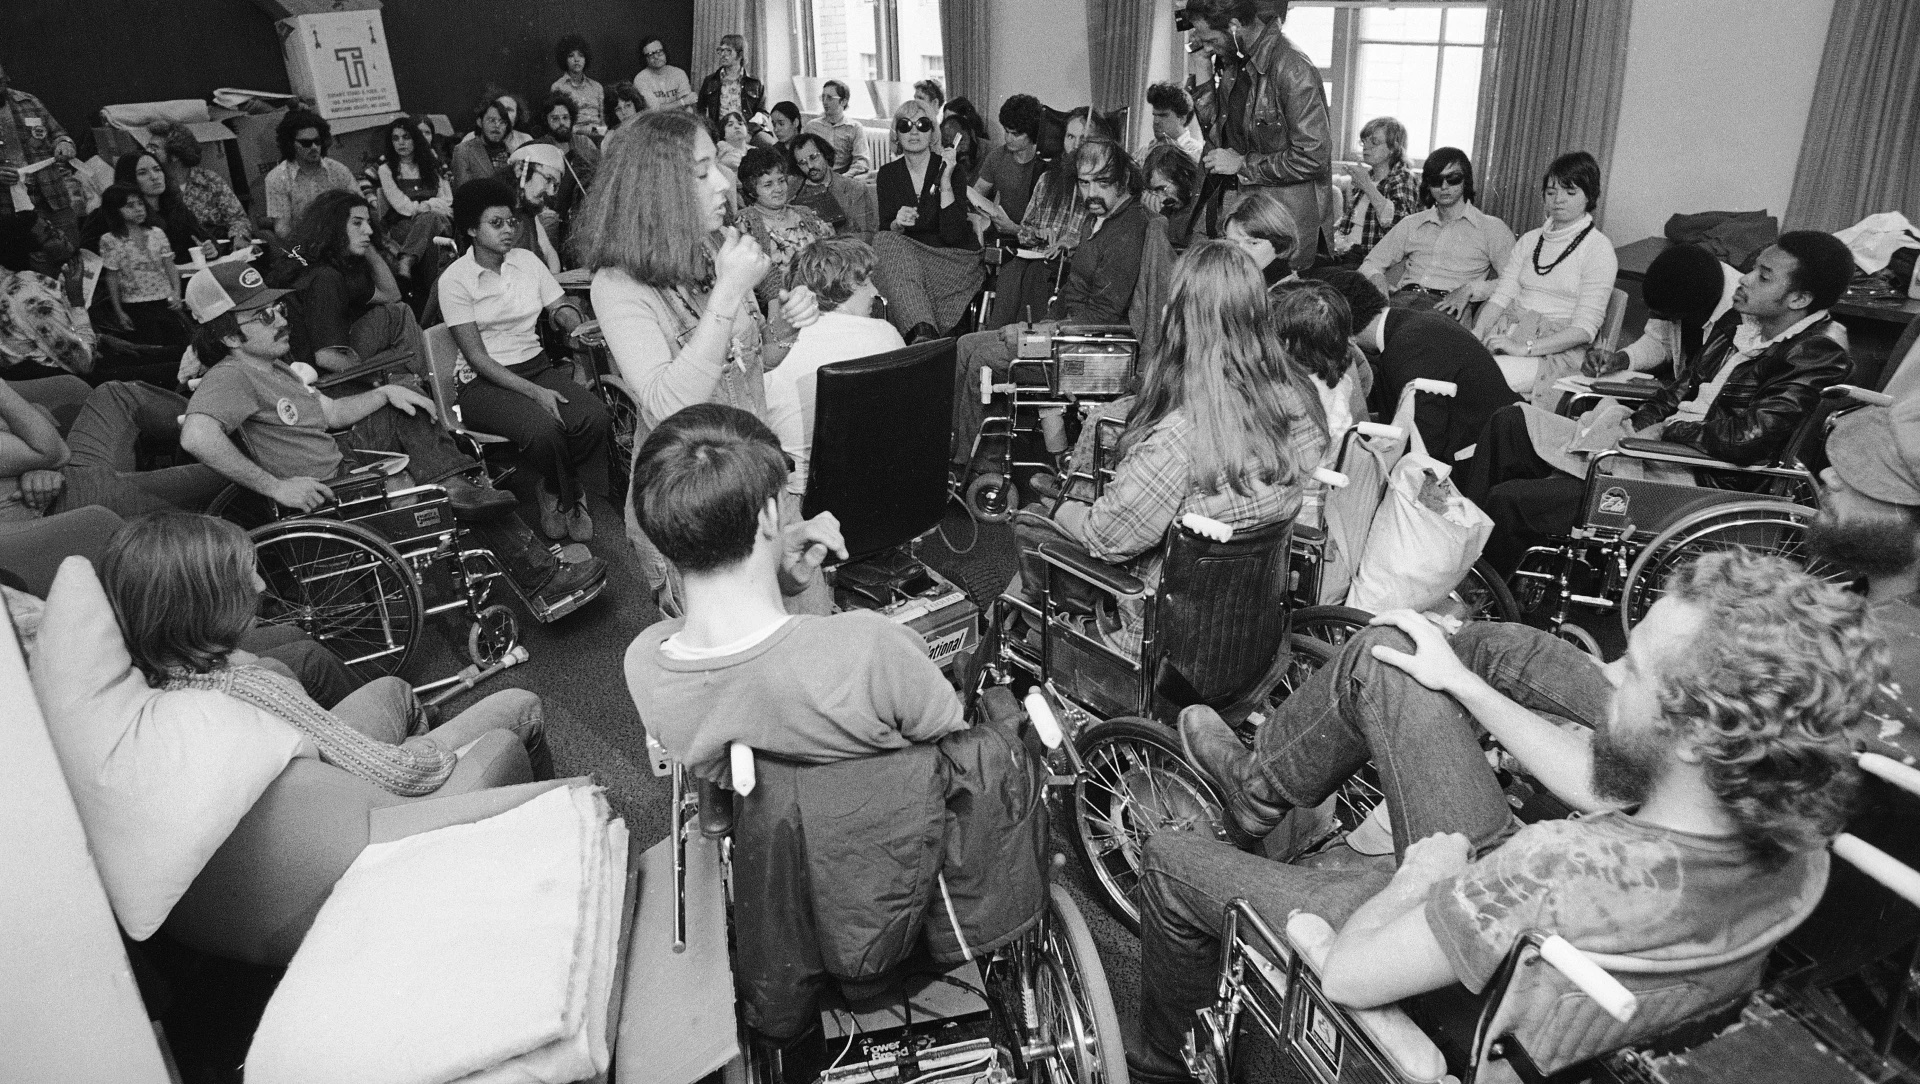 A room filled with organized young people in wheelchairs and other chairs all facing the center, a press camera and tall windows in the background. 